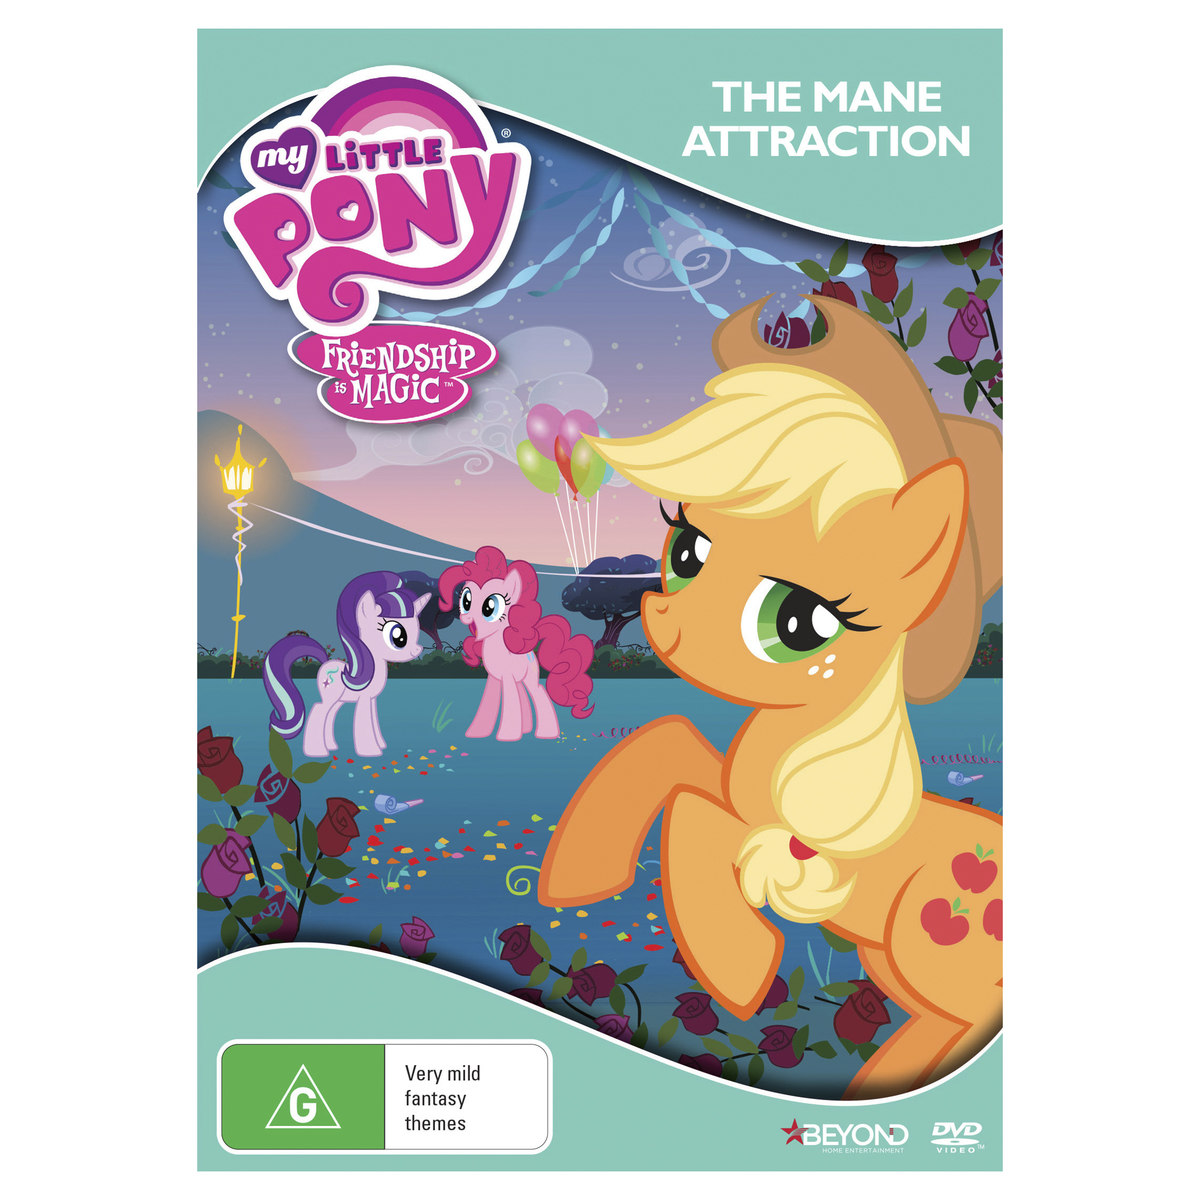 My Little Pony Friendship is Magic: The Mane Attraction - DVD